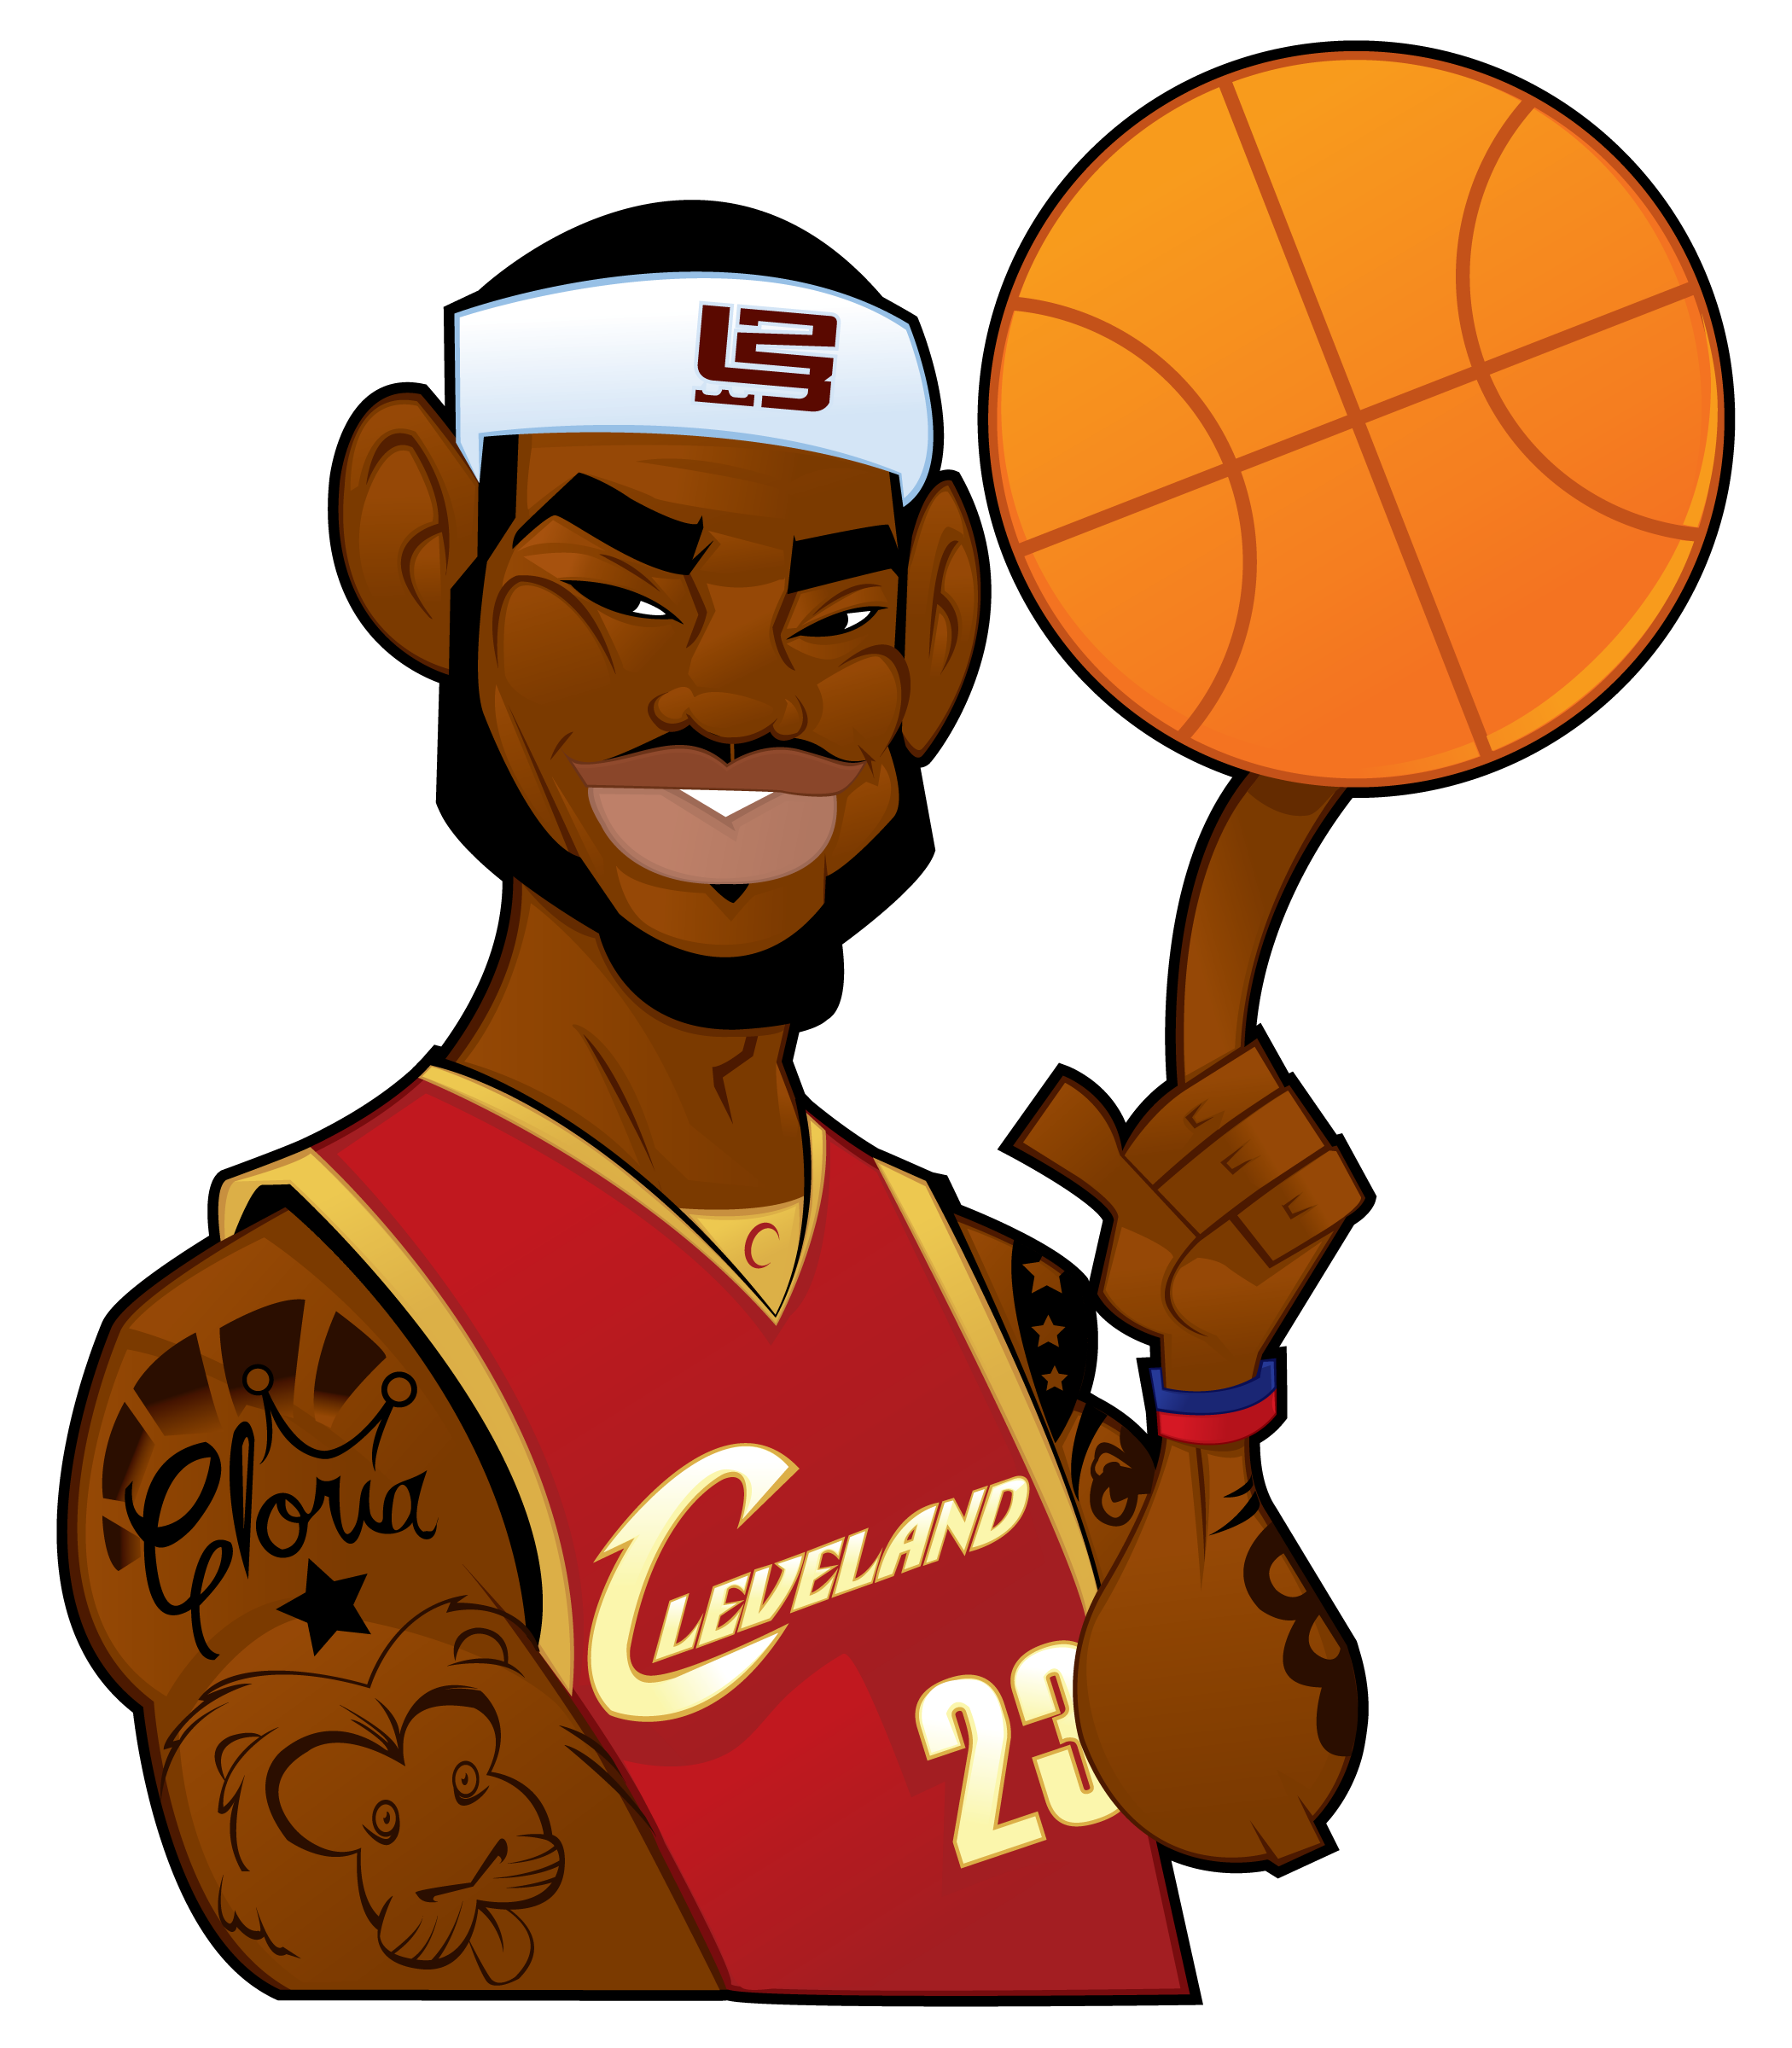 How to Illustrate a LeBron James Cartoon Character - Tuts+ Design ...